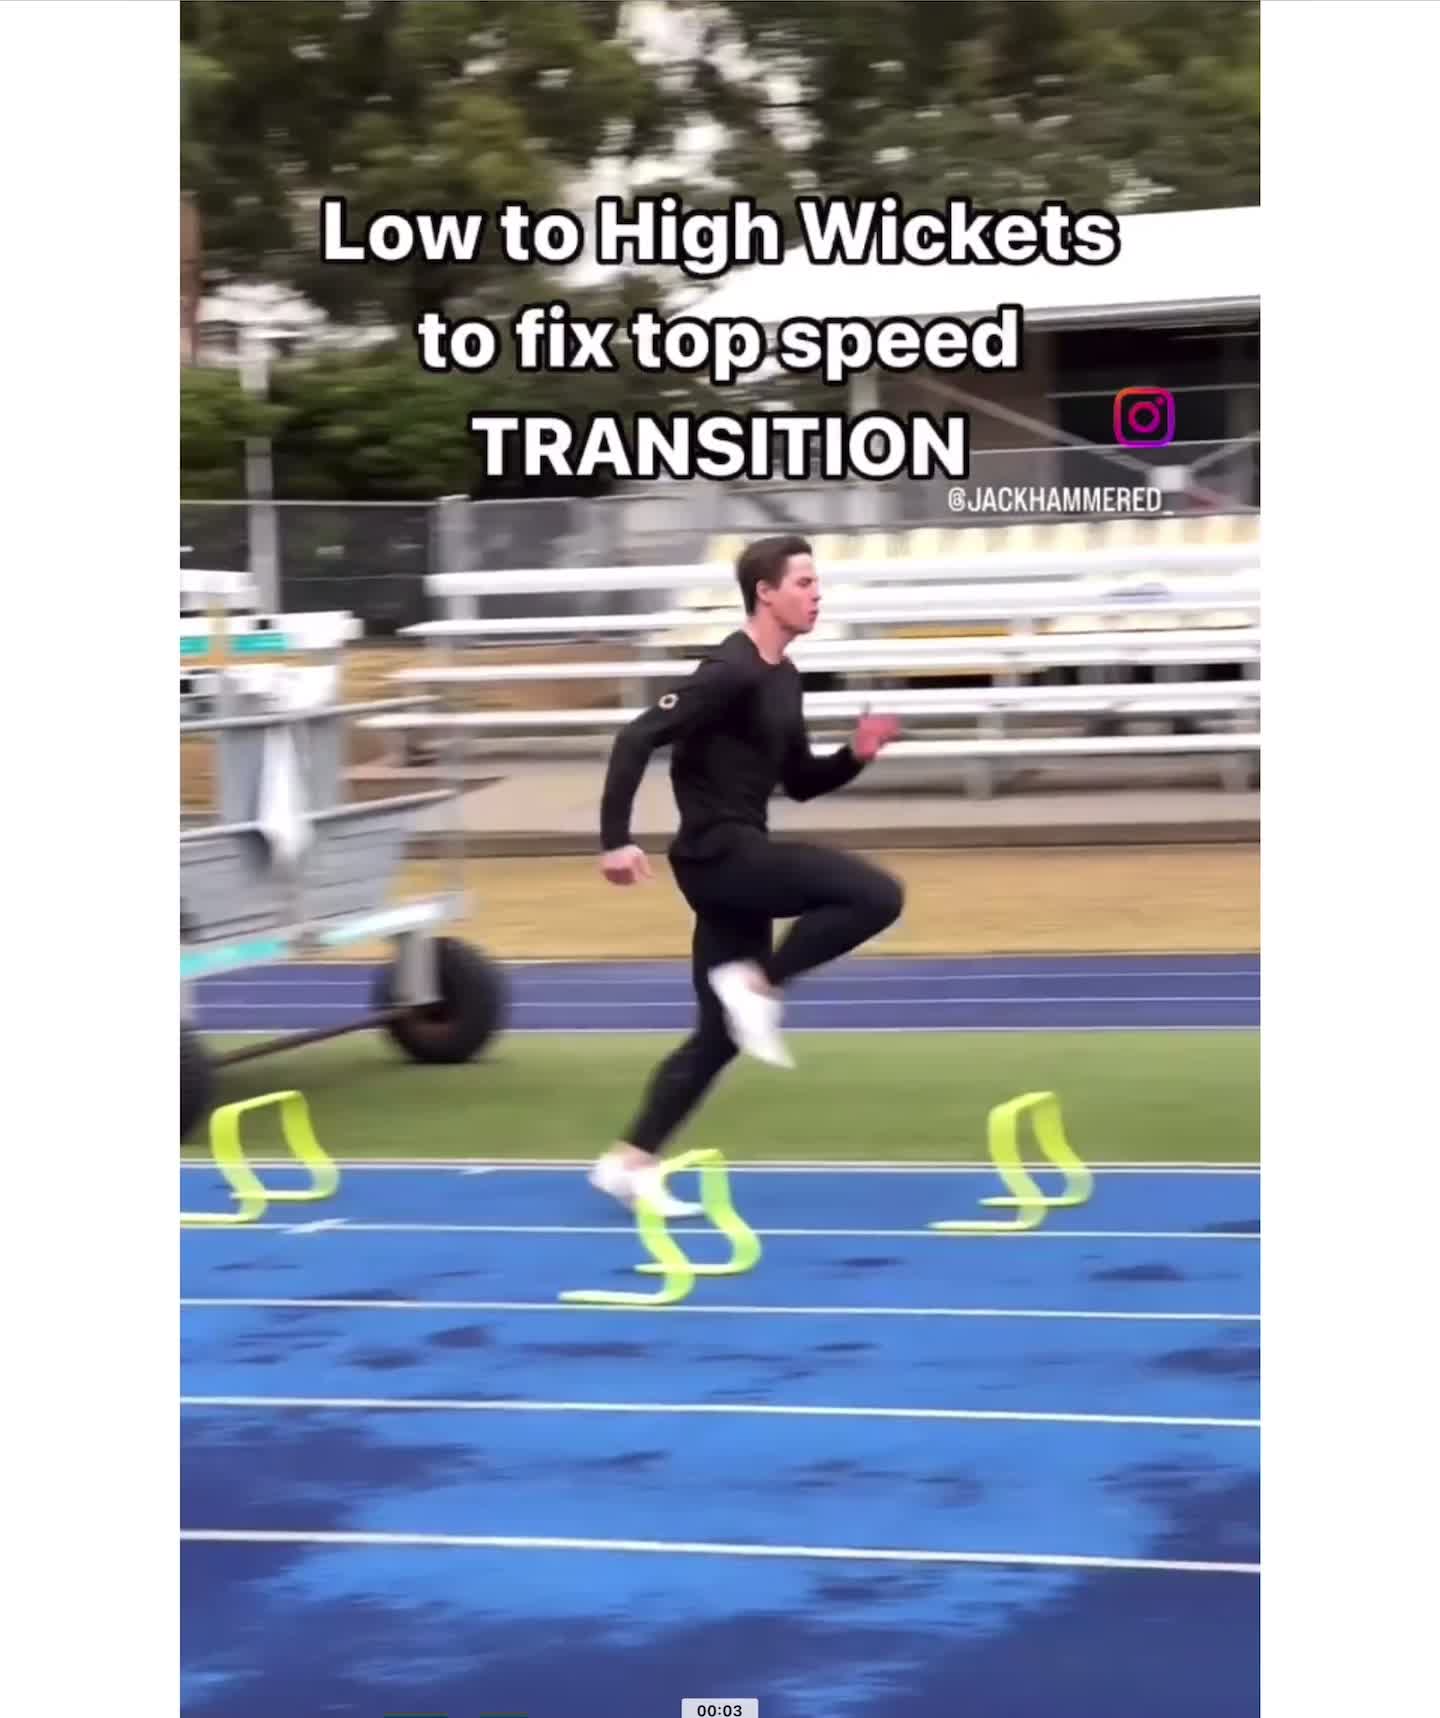 Wickets take away vertical input and focuses on horizontal input